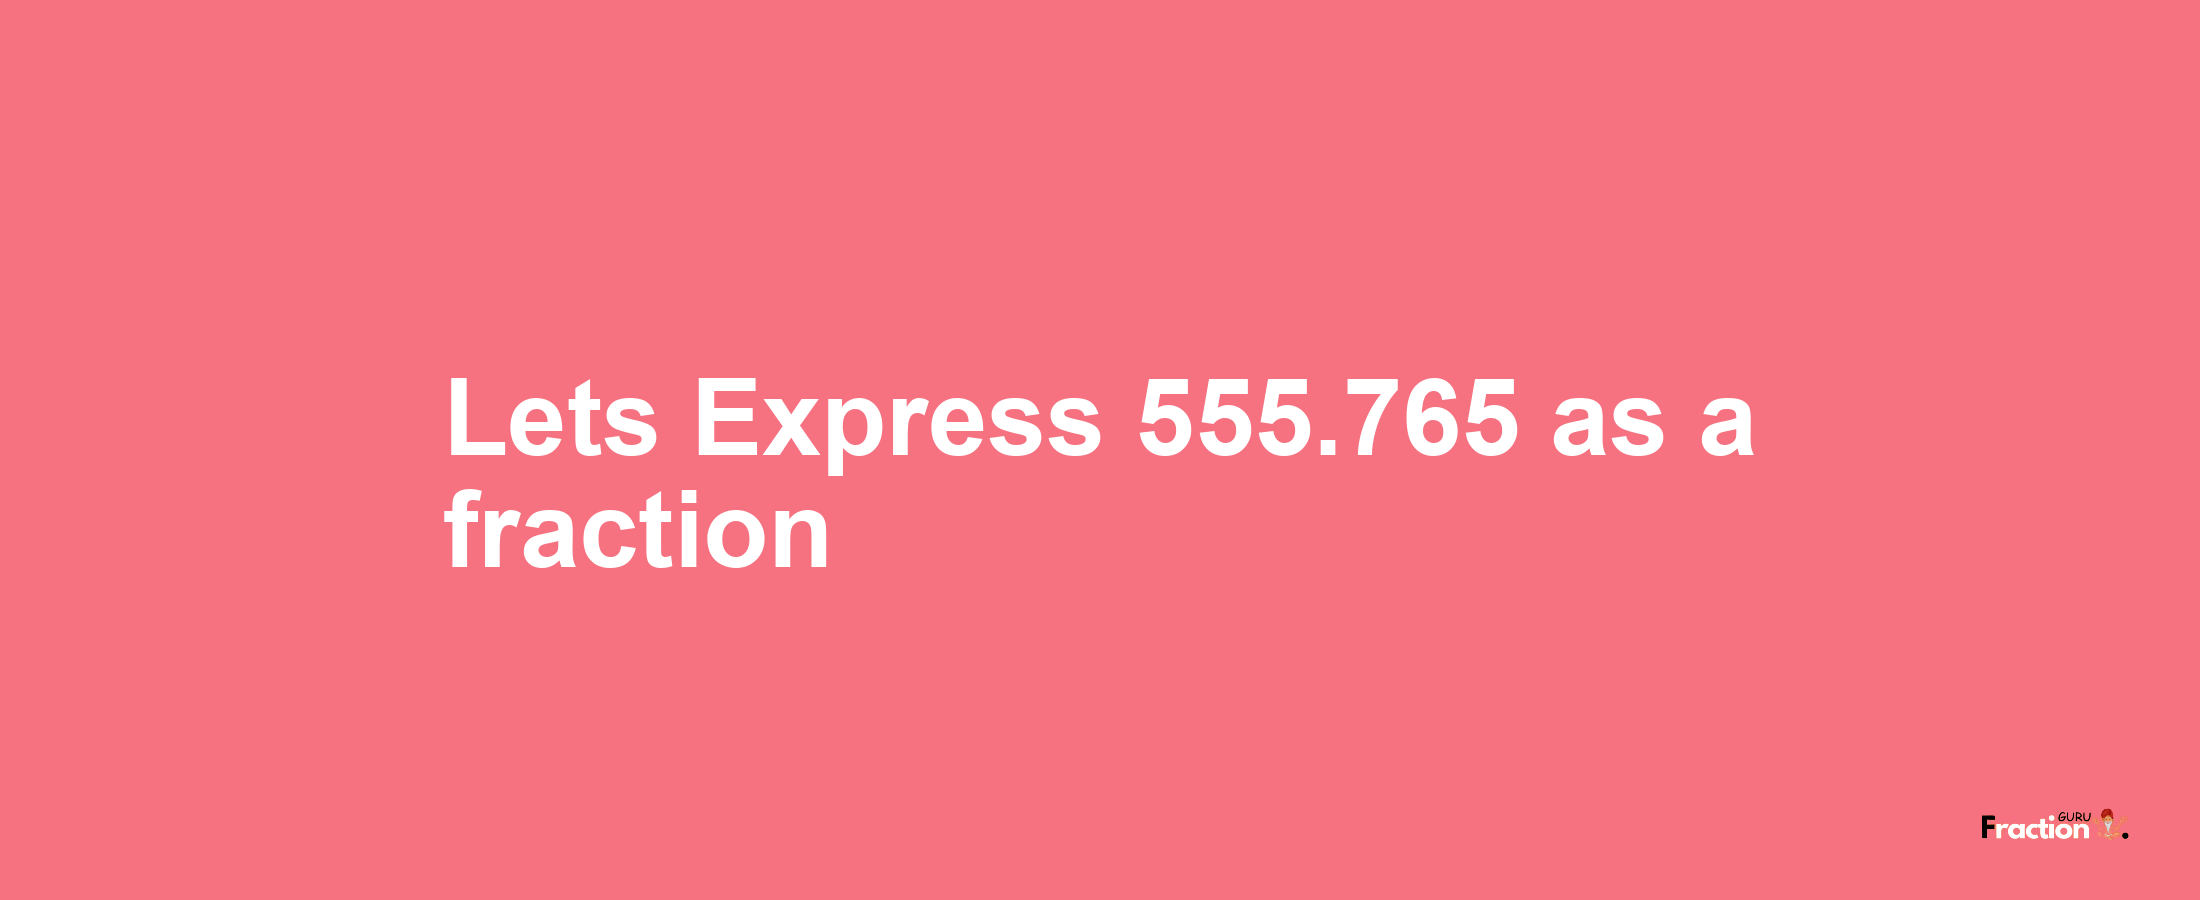 Lets Express 555.765 as afraction